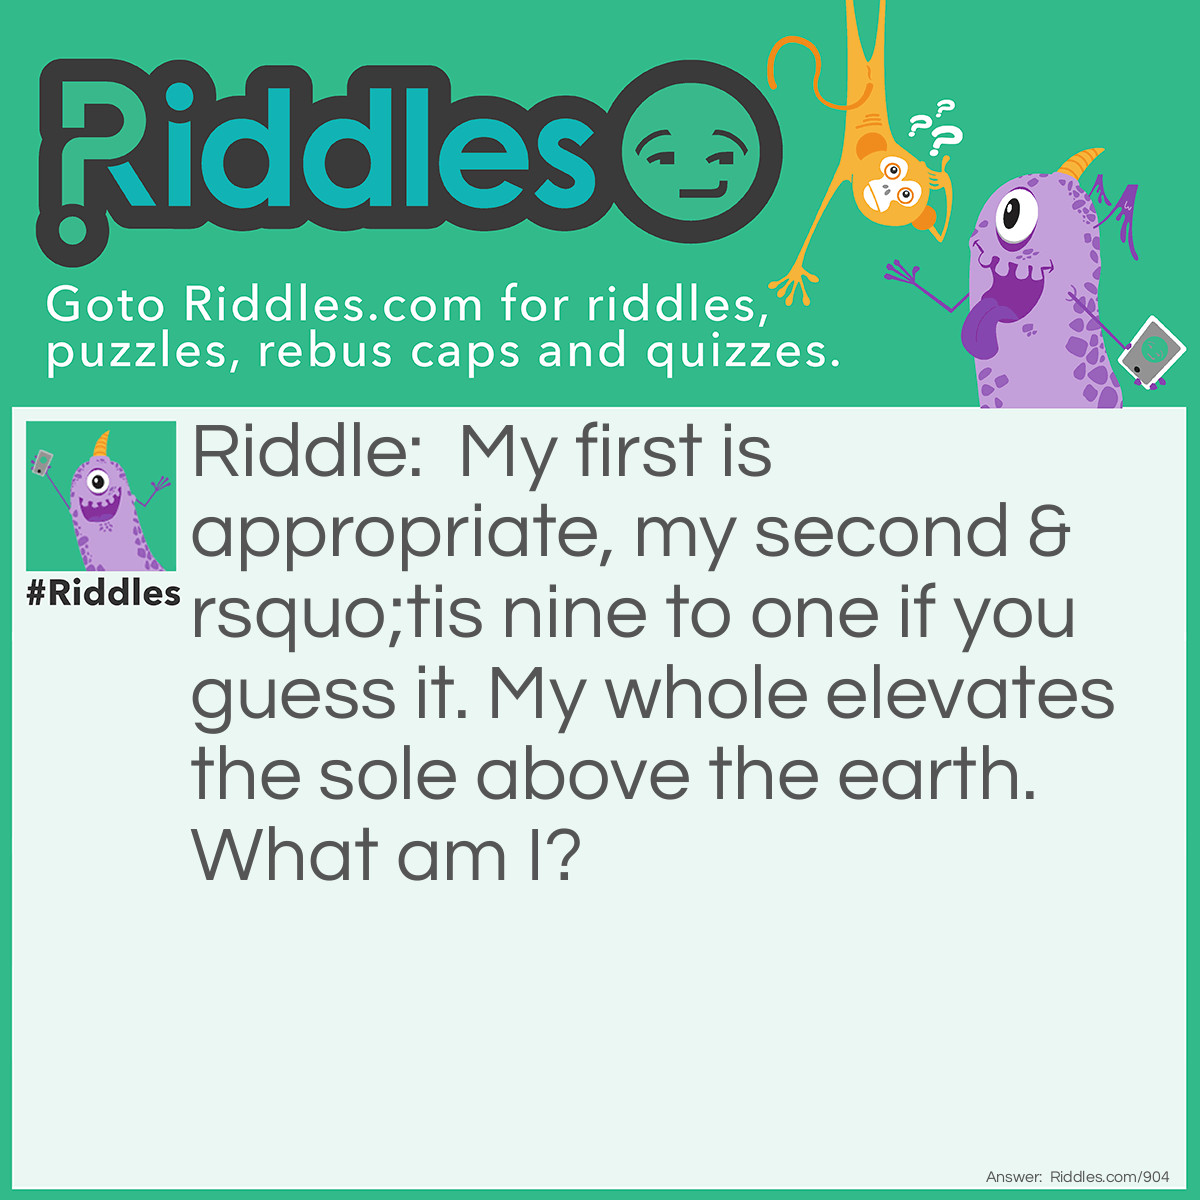 Riddle: My first is appropriate, my second 'tis nine to one if you guess it. My whole elevates the sole above the earth. What am I? Answer: Pat-ten.